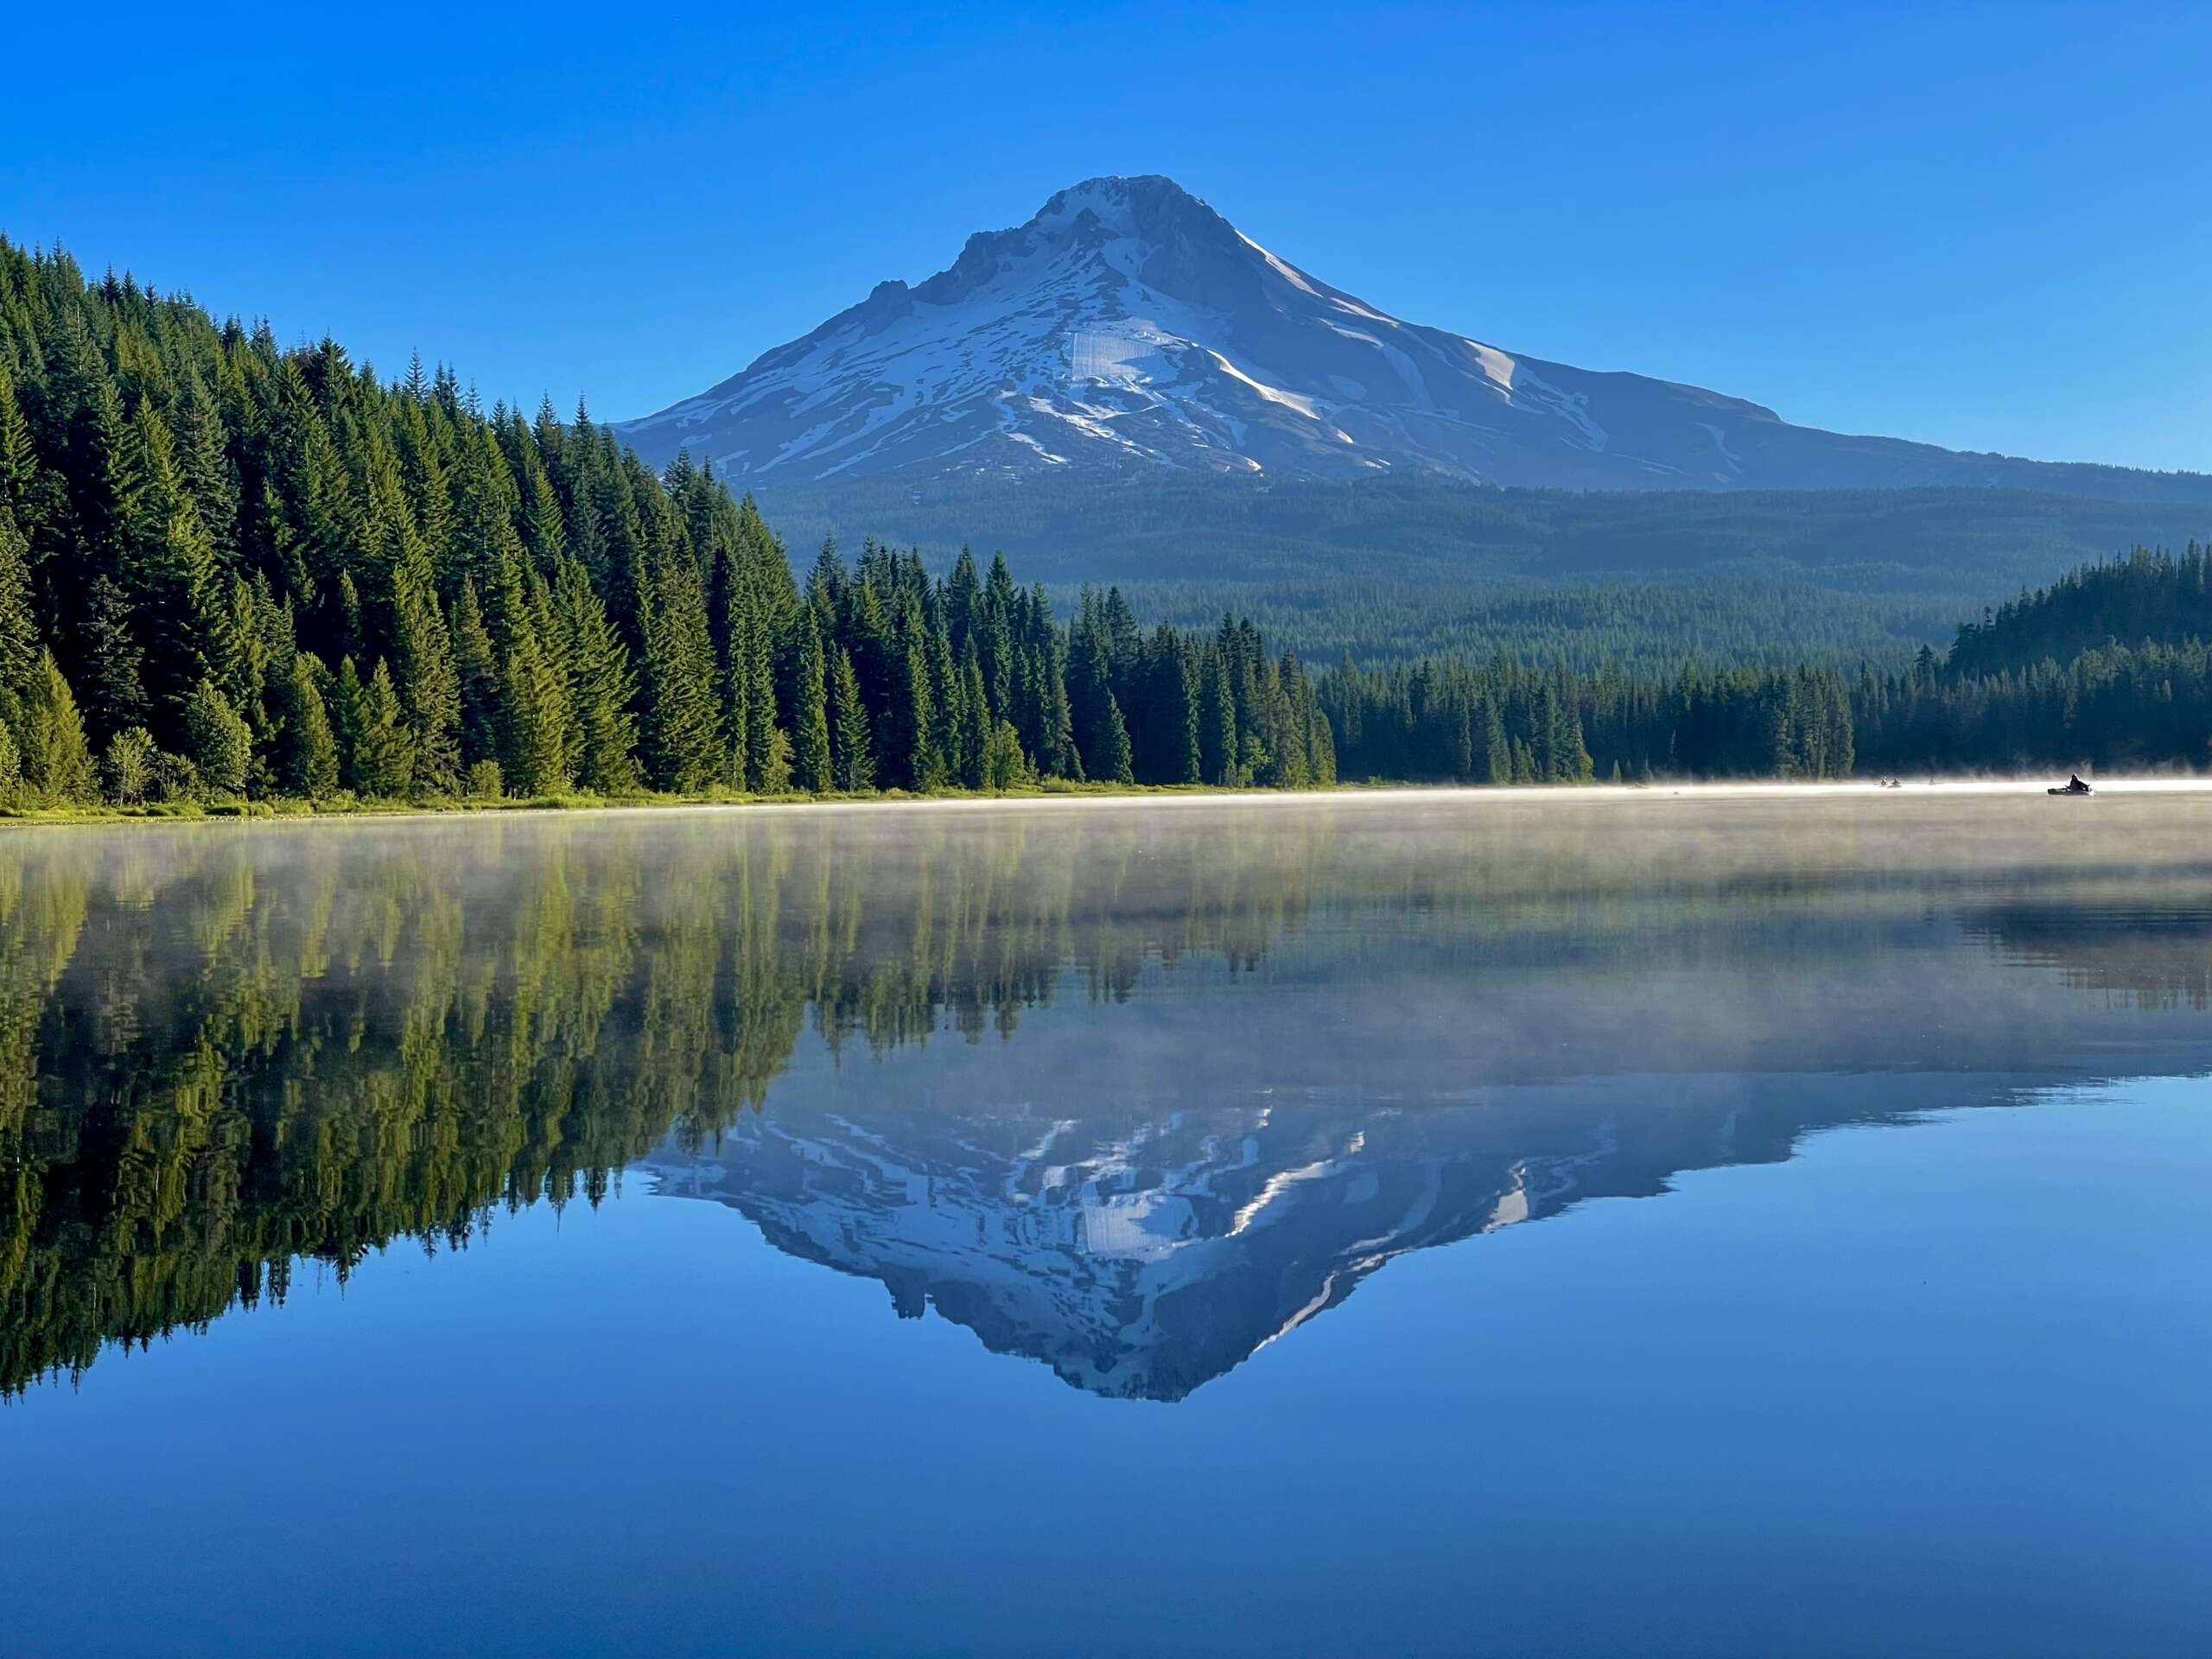 The Greatest Oregon Road Trip: See the Best of Oregon’s Natural Wonders in 14 Days